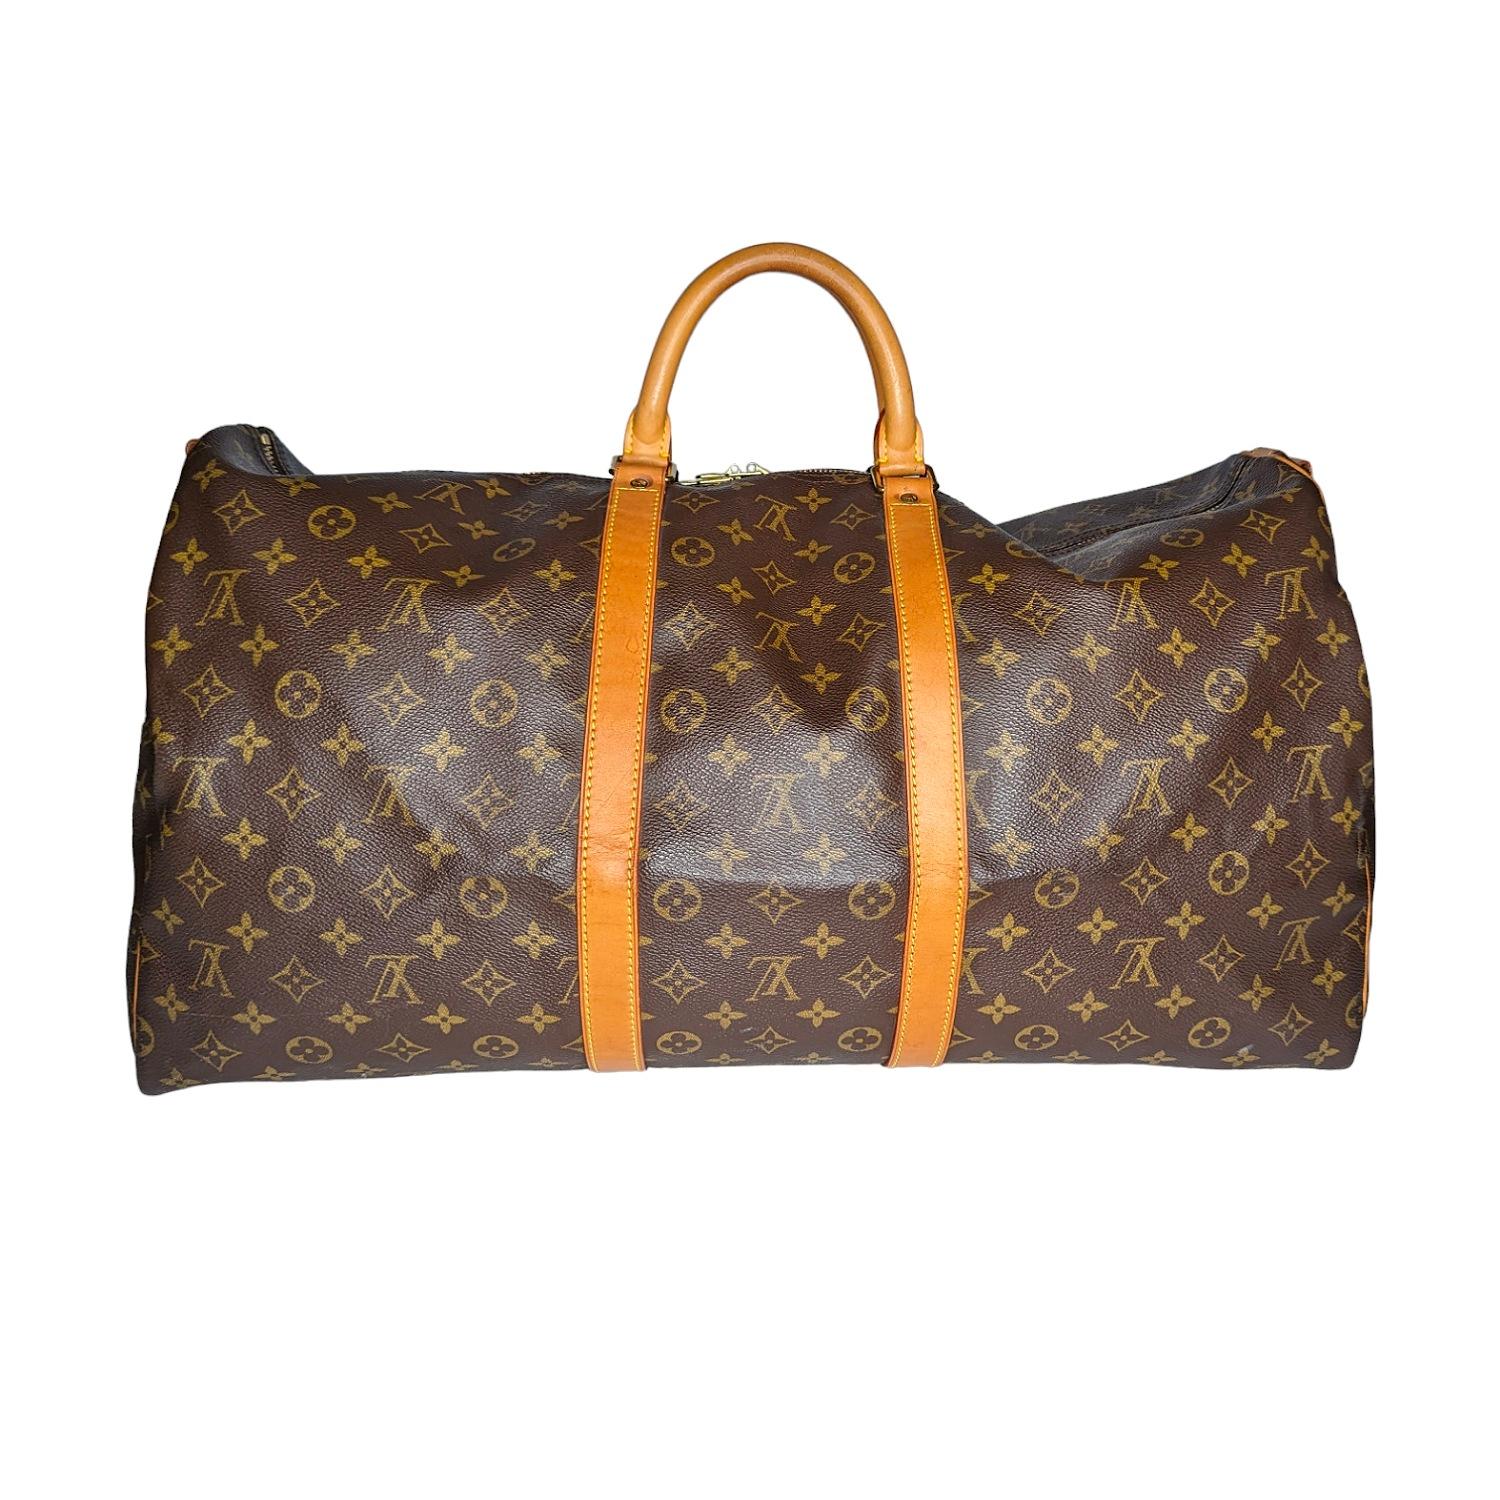 This vintage duffle is crafted of signature Louis Vuitton monogram on dark brown toile coated canvas. The bag features a vachetta cowhide leather strap, trim, rolled top handles and brass hardware. The top zippers open to a spacious cocoa brown